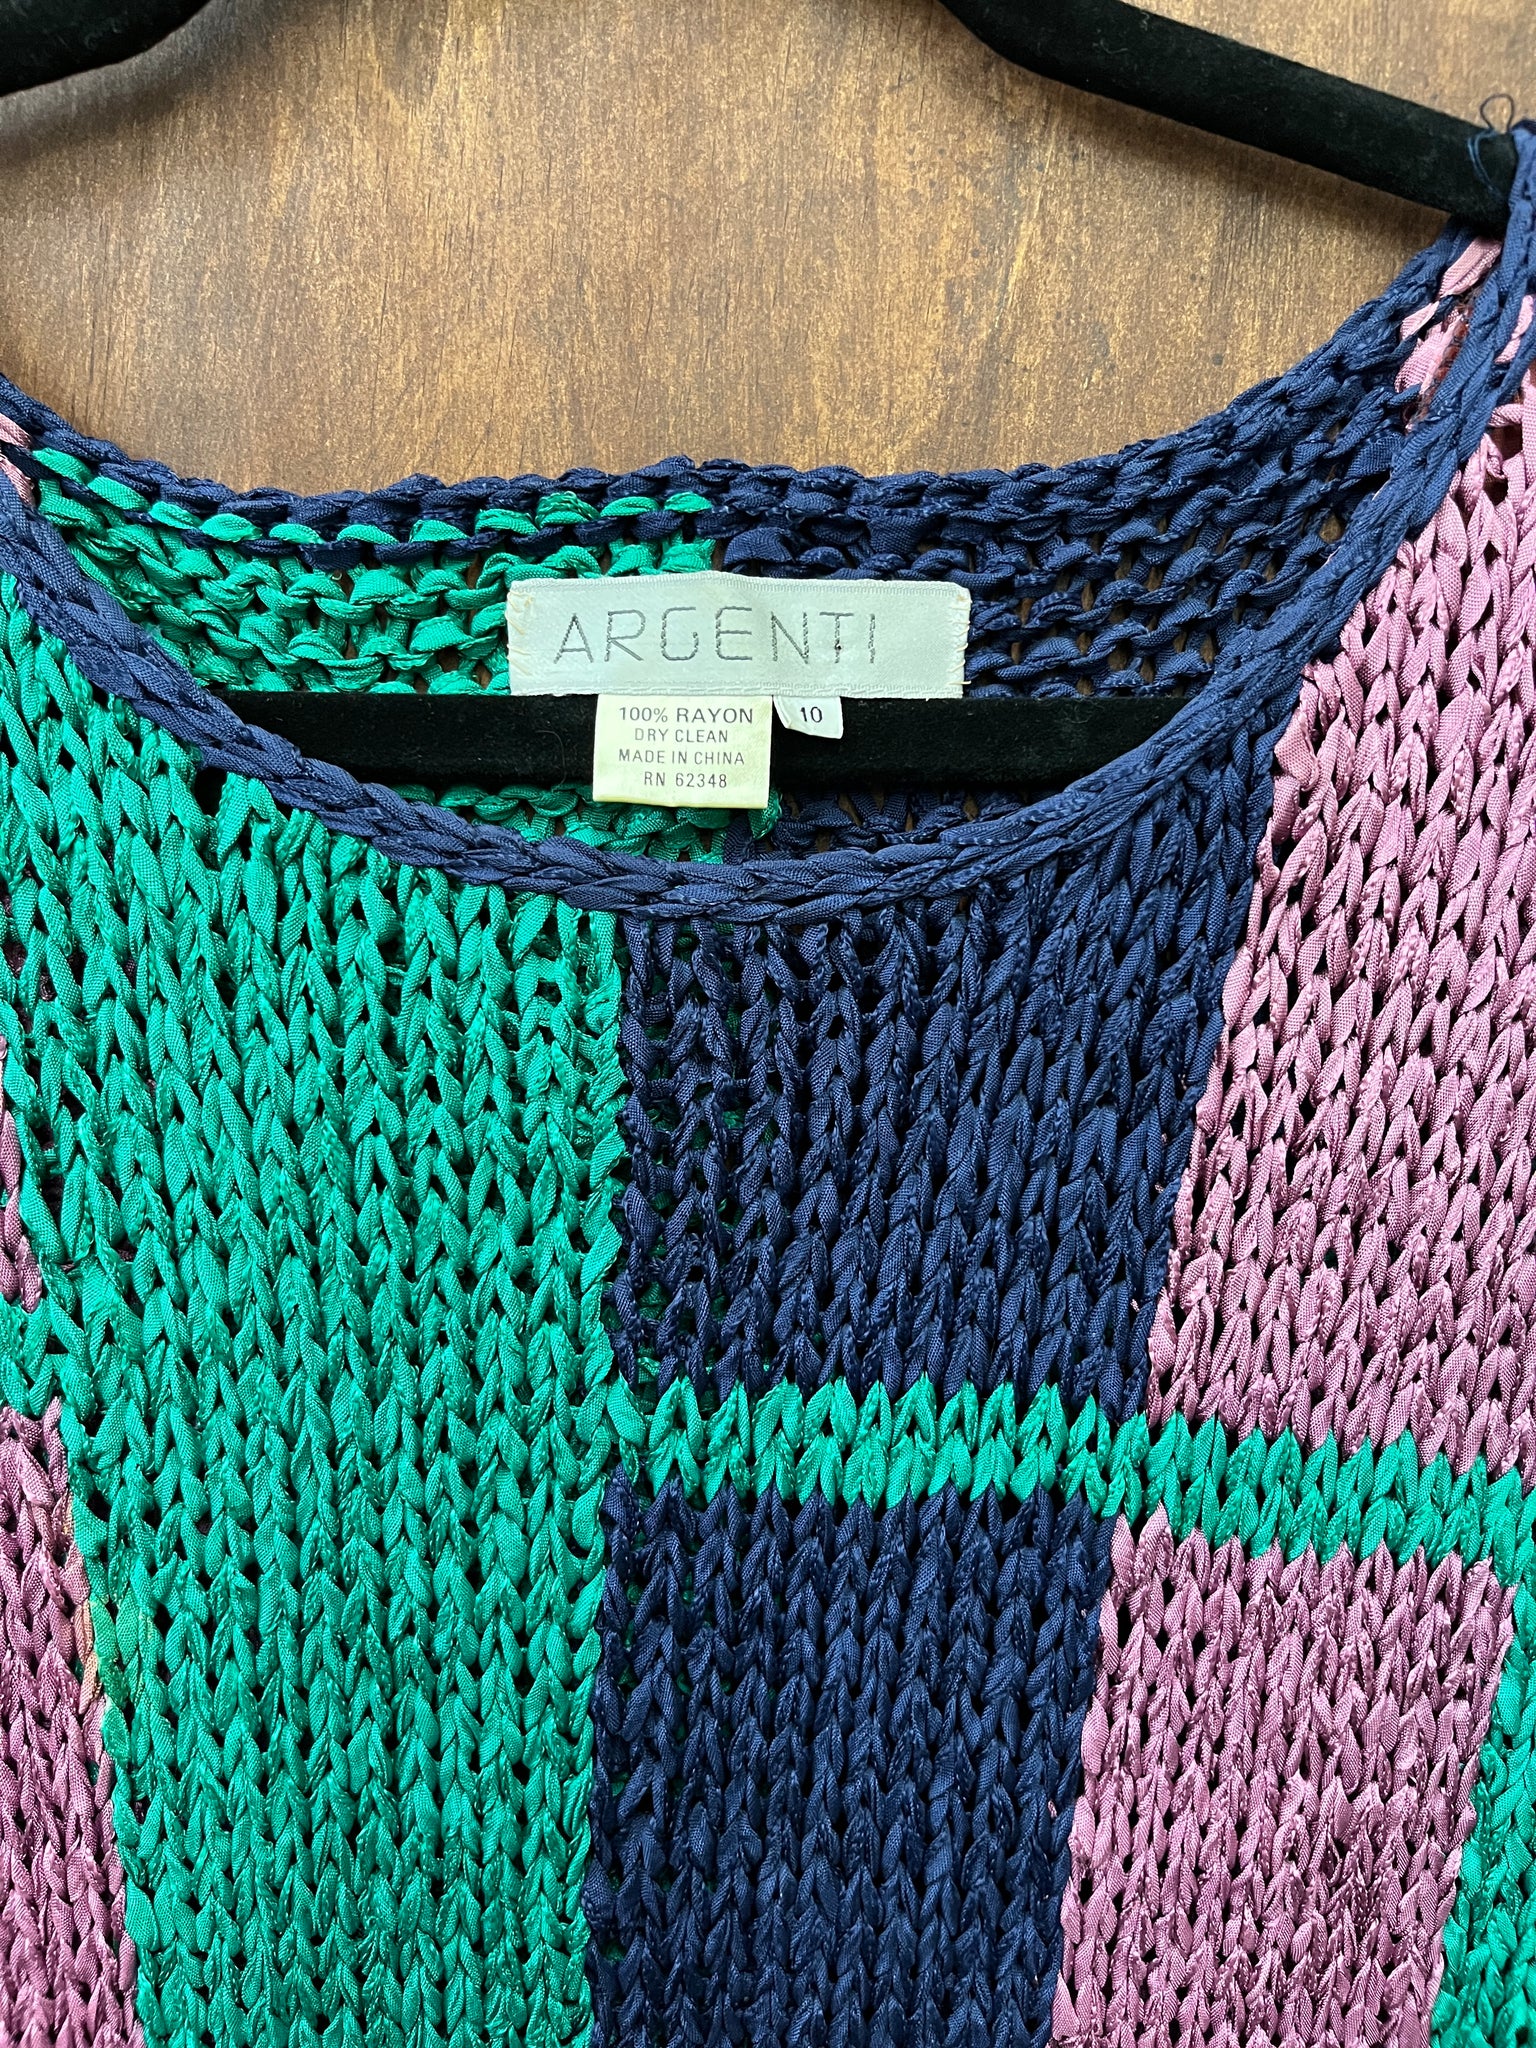 1990s SWEATER- Ribbon knit navy w/ color block